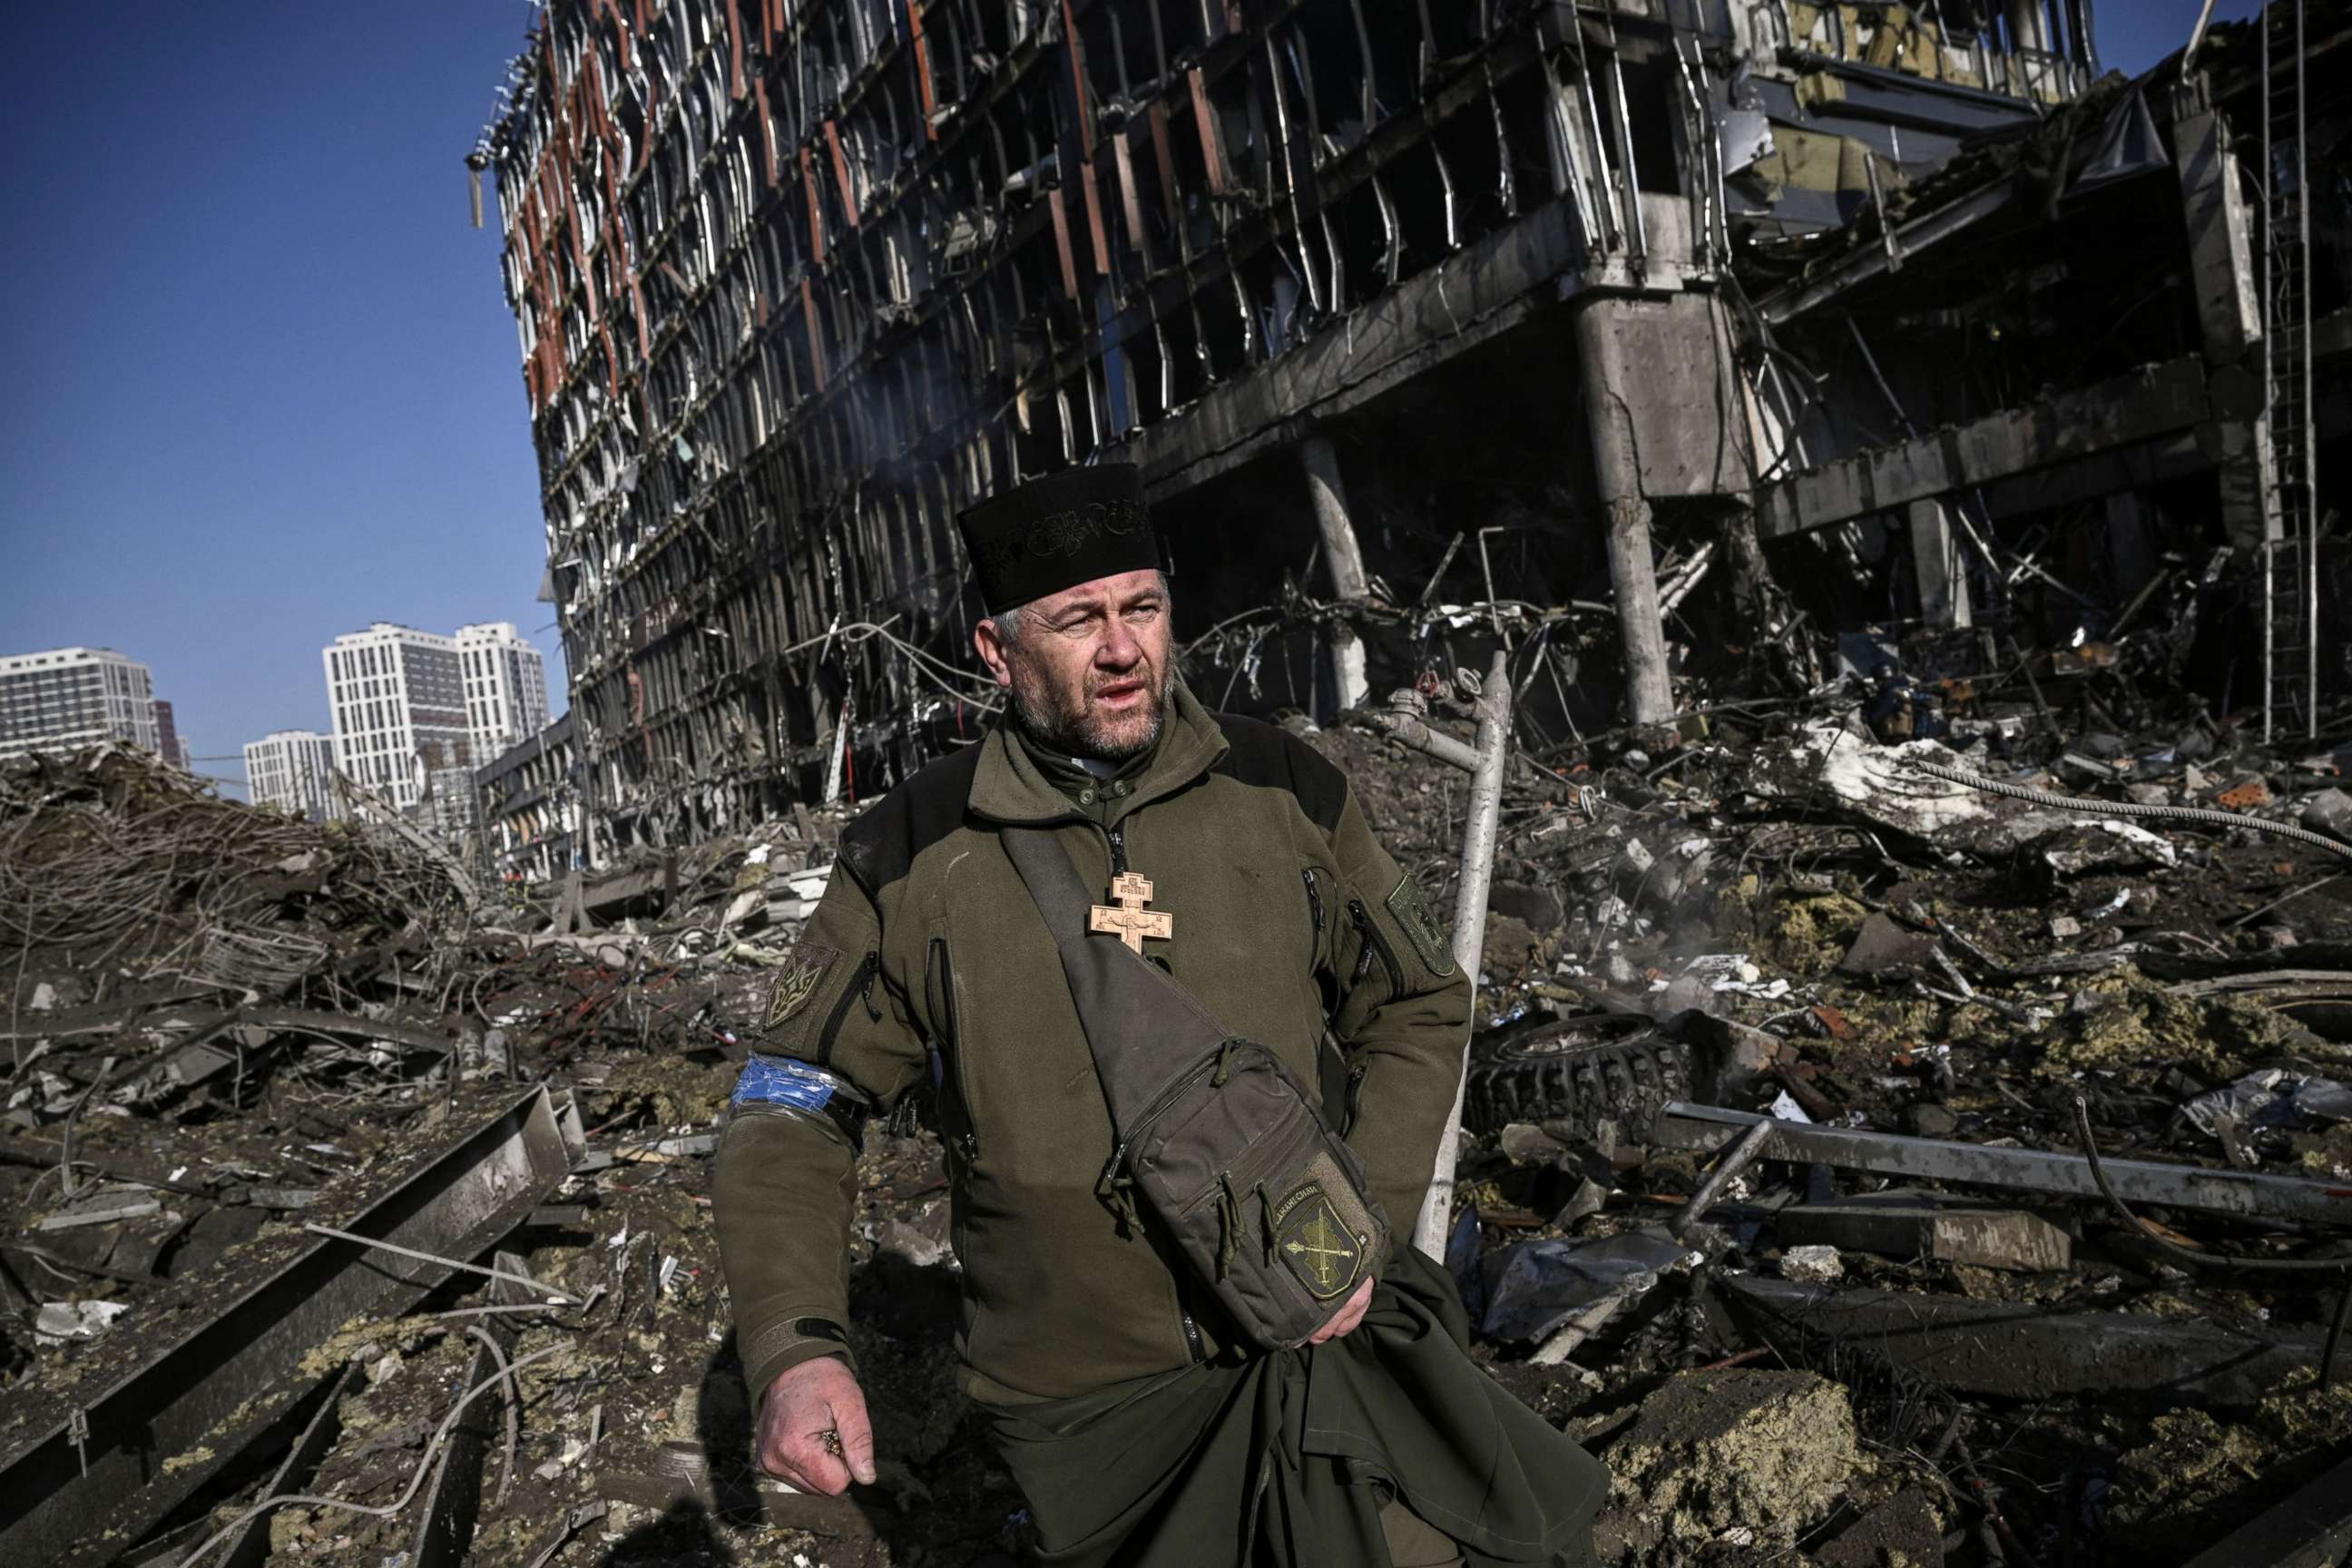 PHOTO: Ukraine army Chaplain Mikola Madenski walks through debris outside the destroyed Retroville shopping mall in a residential district, after a Russian attack on the Ukranian capital Kyiv on March 21, 2022.